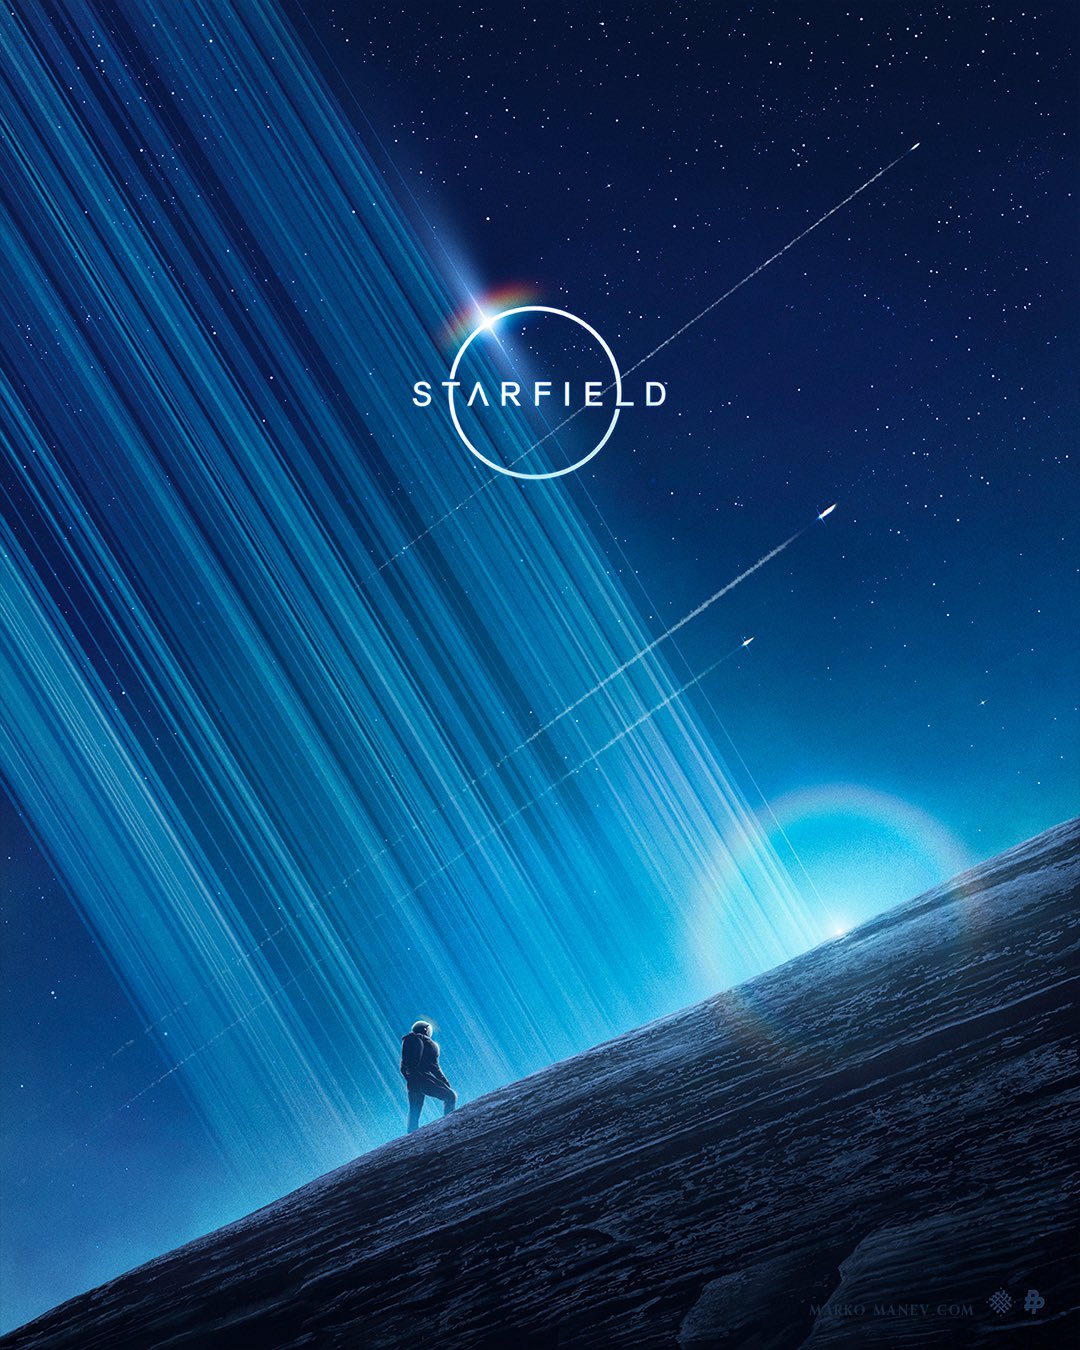 Official Starfield poster for Bethesda Game Studios by the Poster Posse